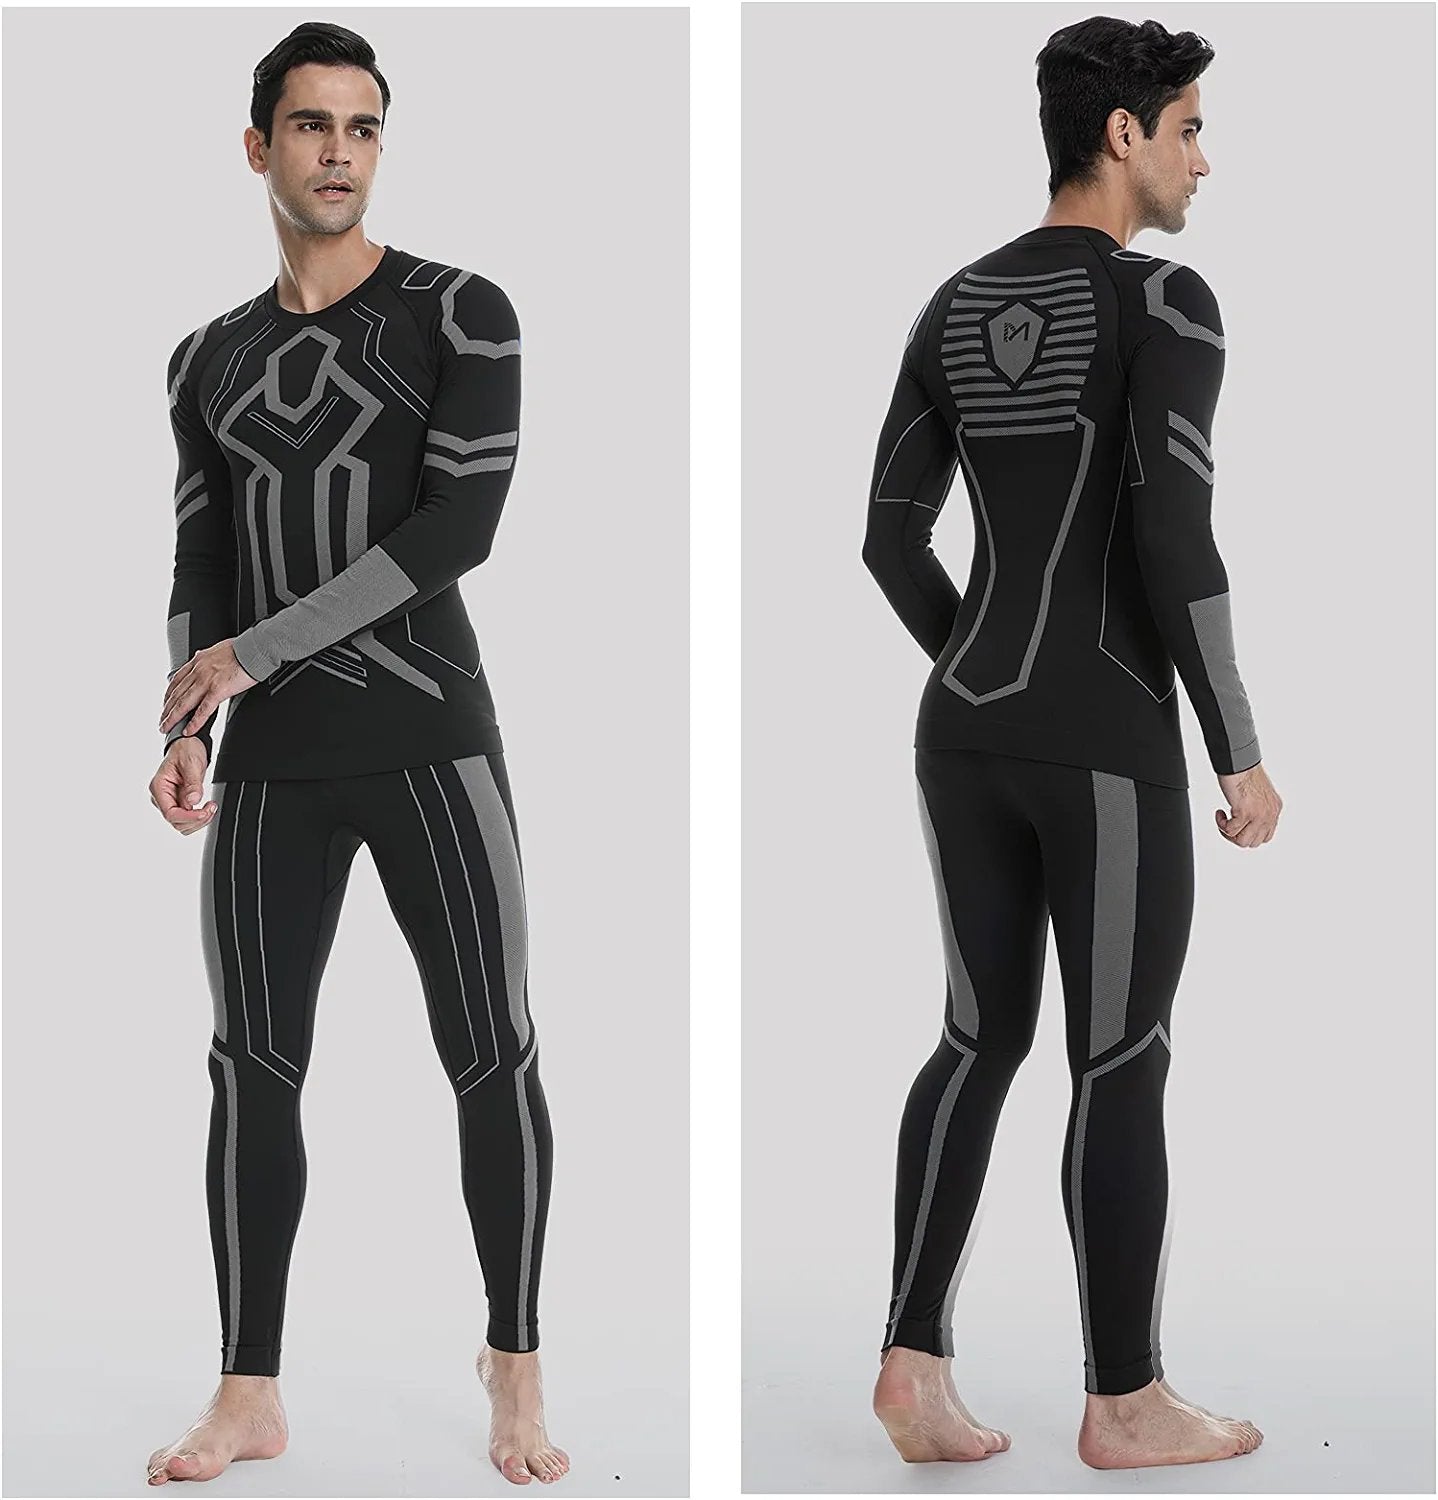 Men's Thermal Underwear Set, Winter Base Layer Sport Long Johns Top & Bottom Suit Compression Cold Weather Gear for Skiing